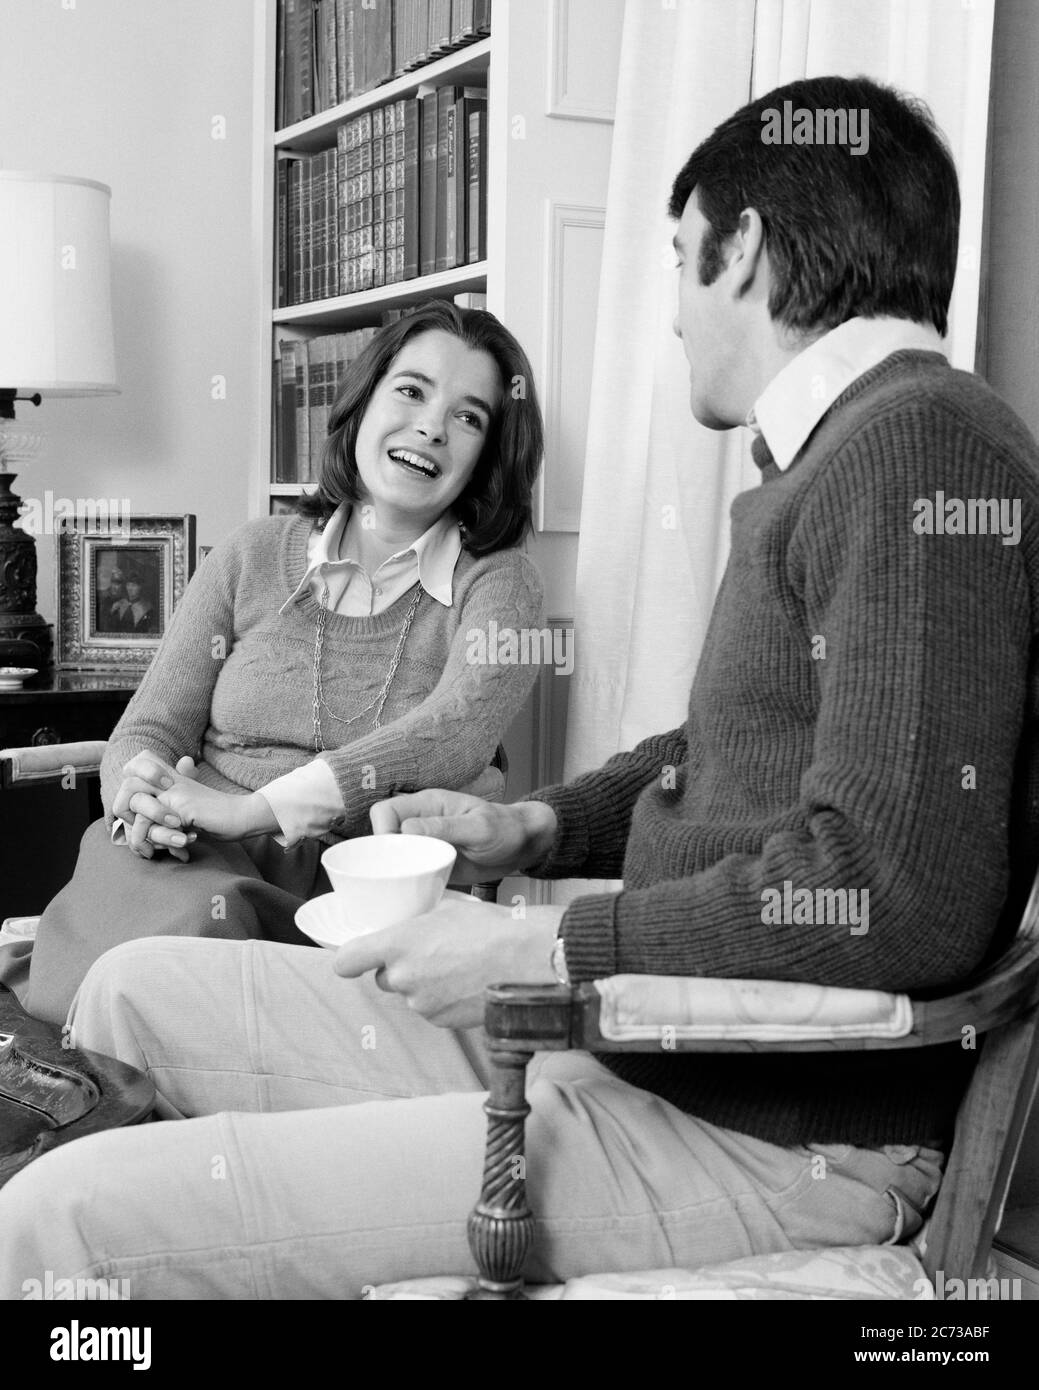 1970s COUPLE IN LIVING ROOM LAUGHING WOMAN SITTING WITH HANDS CLASPED FINGERS INTERTWINED LOOKING AT MAN HOLDING CUP AND SAUCER - s20812 HAR001 HARS PAIR ROMANCE FLIRTING OLD TIME NOSTALGIA OLD FASHION 1 COMMUNICATION LAUGH BALANCE TEAMWORK FINGERS PLEASED JOY LIFESTYLE FEMALES MARRIED SPOUSE HUSBANDS HOME LIFE COPY SPACE FRIENDSHIP HALF-LENGTH LADIES PERSONS CARING MALES NERVOUS B&W PARTNER DATING HAPPINESS CHEERFUL STRATEGY AND EXCITEMENT AT IN OPPORTUNITY SMILES CONNECTION CLASPED JOYFUL MID-ADULT MID-ADULT MAN MID-ADULT WOMAN RELAXATION TOGETHERNESS WIVES BLACK AND WHITE Stock Photo